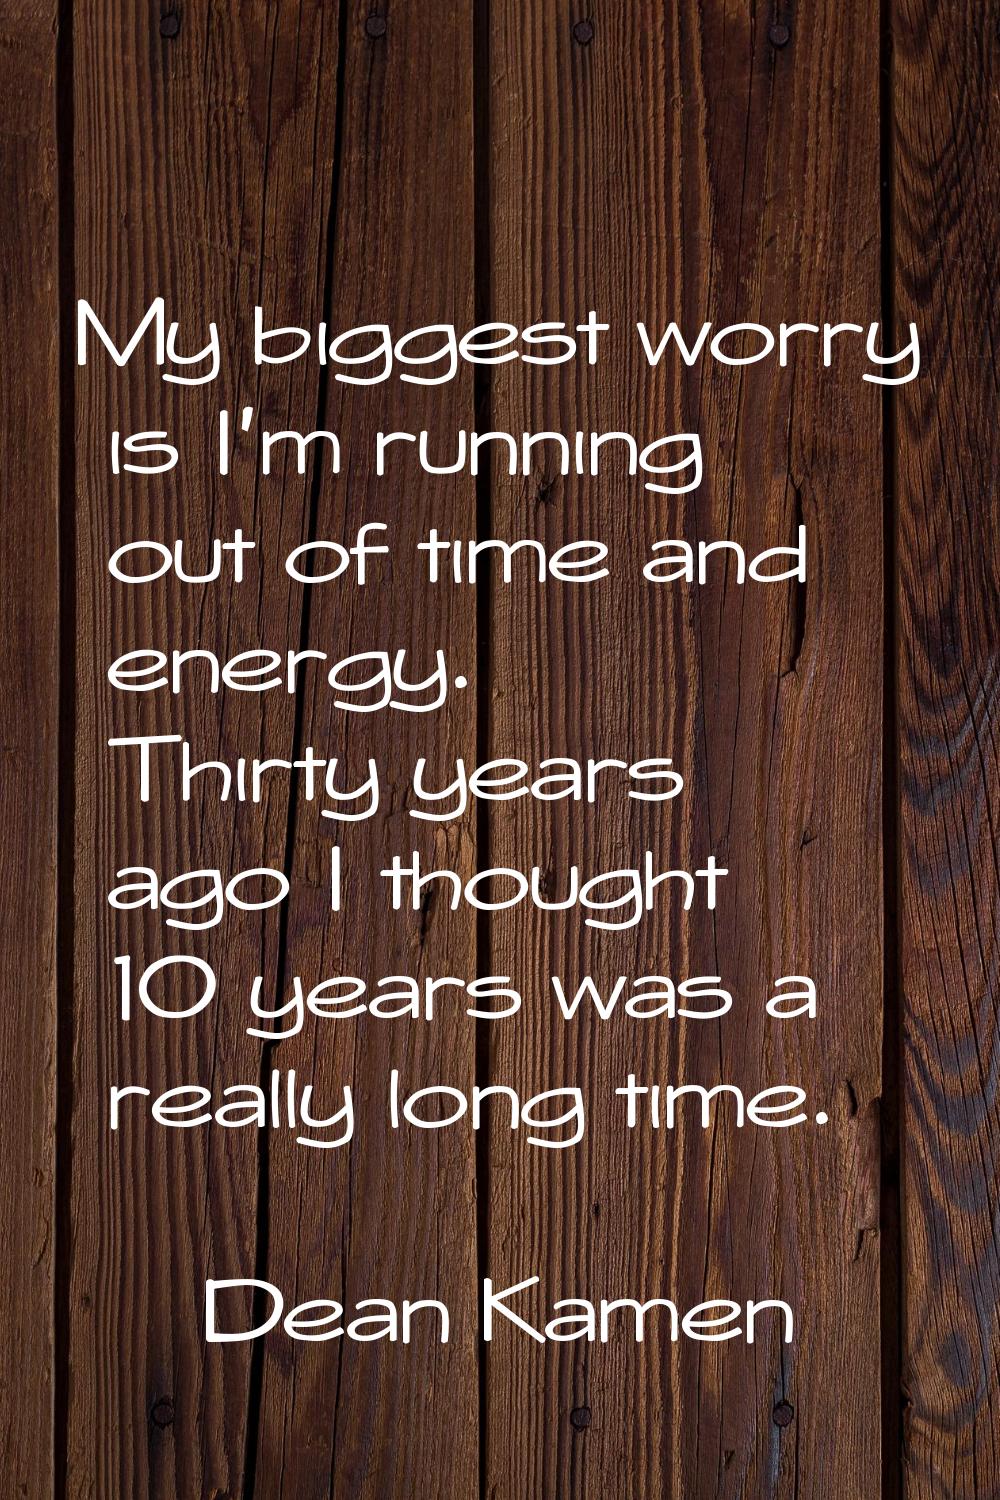 My biggest worry is I'm running out of time and energy. Thirty years ago I thought 10 years was a r